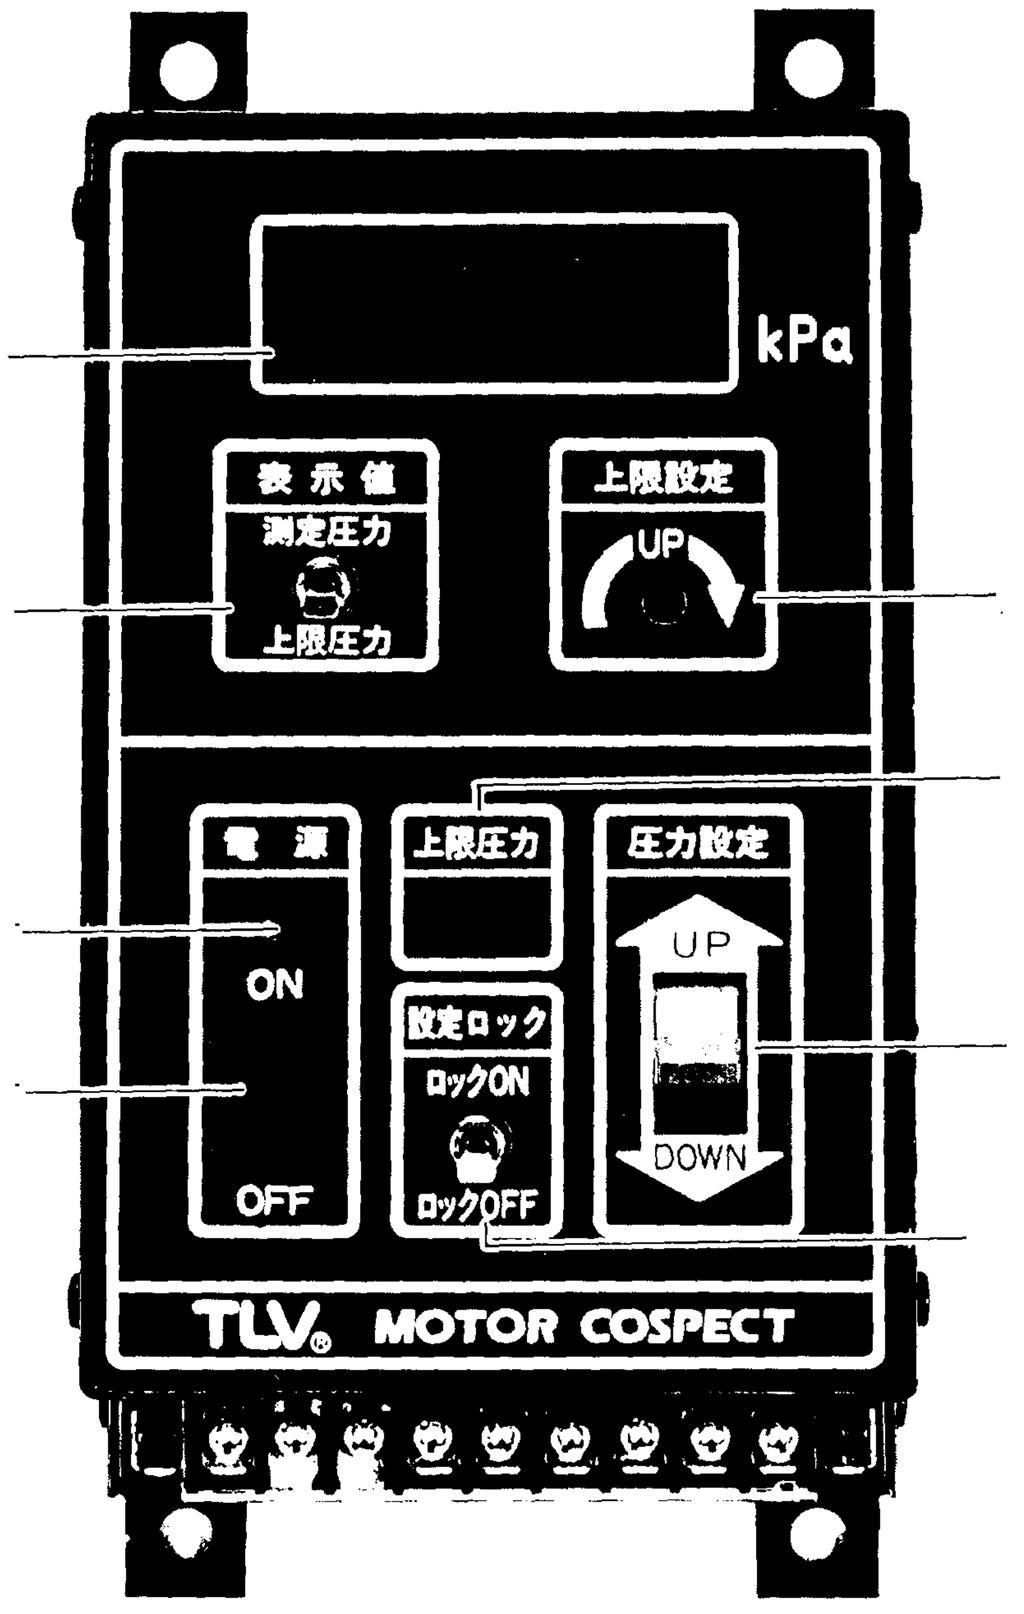 17 Controller Operation <MC-2> (5) Pressure Indicator (6) Selector Switch (1) Power Supply LED (1) Power Switch (7) Maximum Allowable Pressure Setting Knob (4) Maximum Allowable Pressure LED (2)